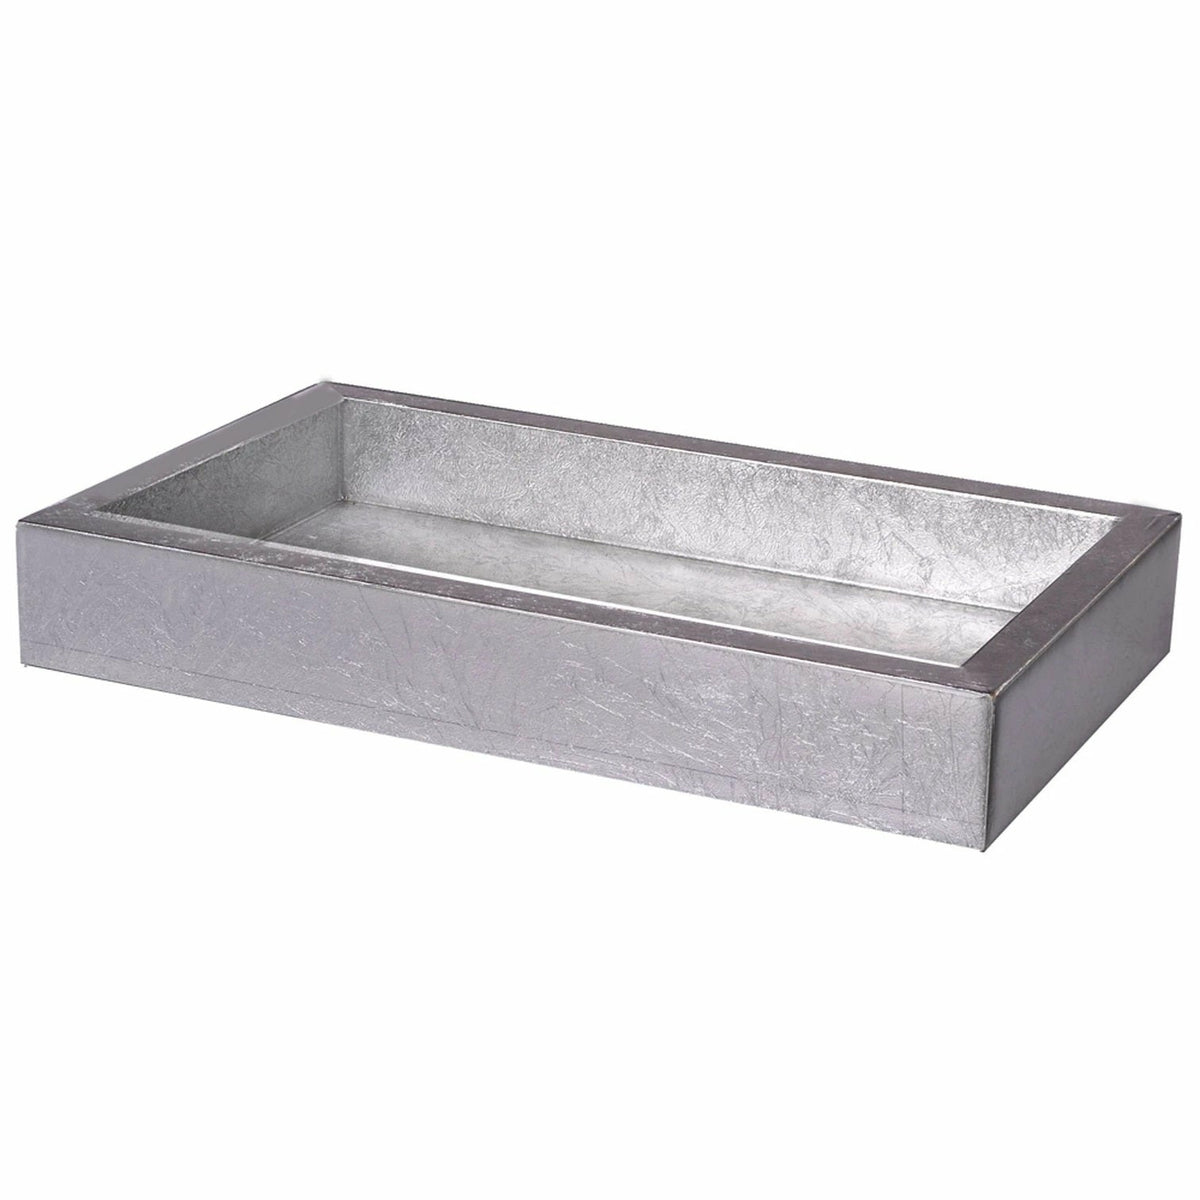 Mike and Ally Eos Bath Accessories Small Tray Silver Leaf